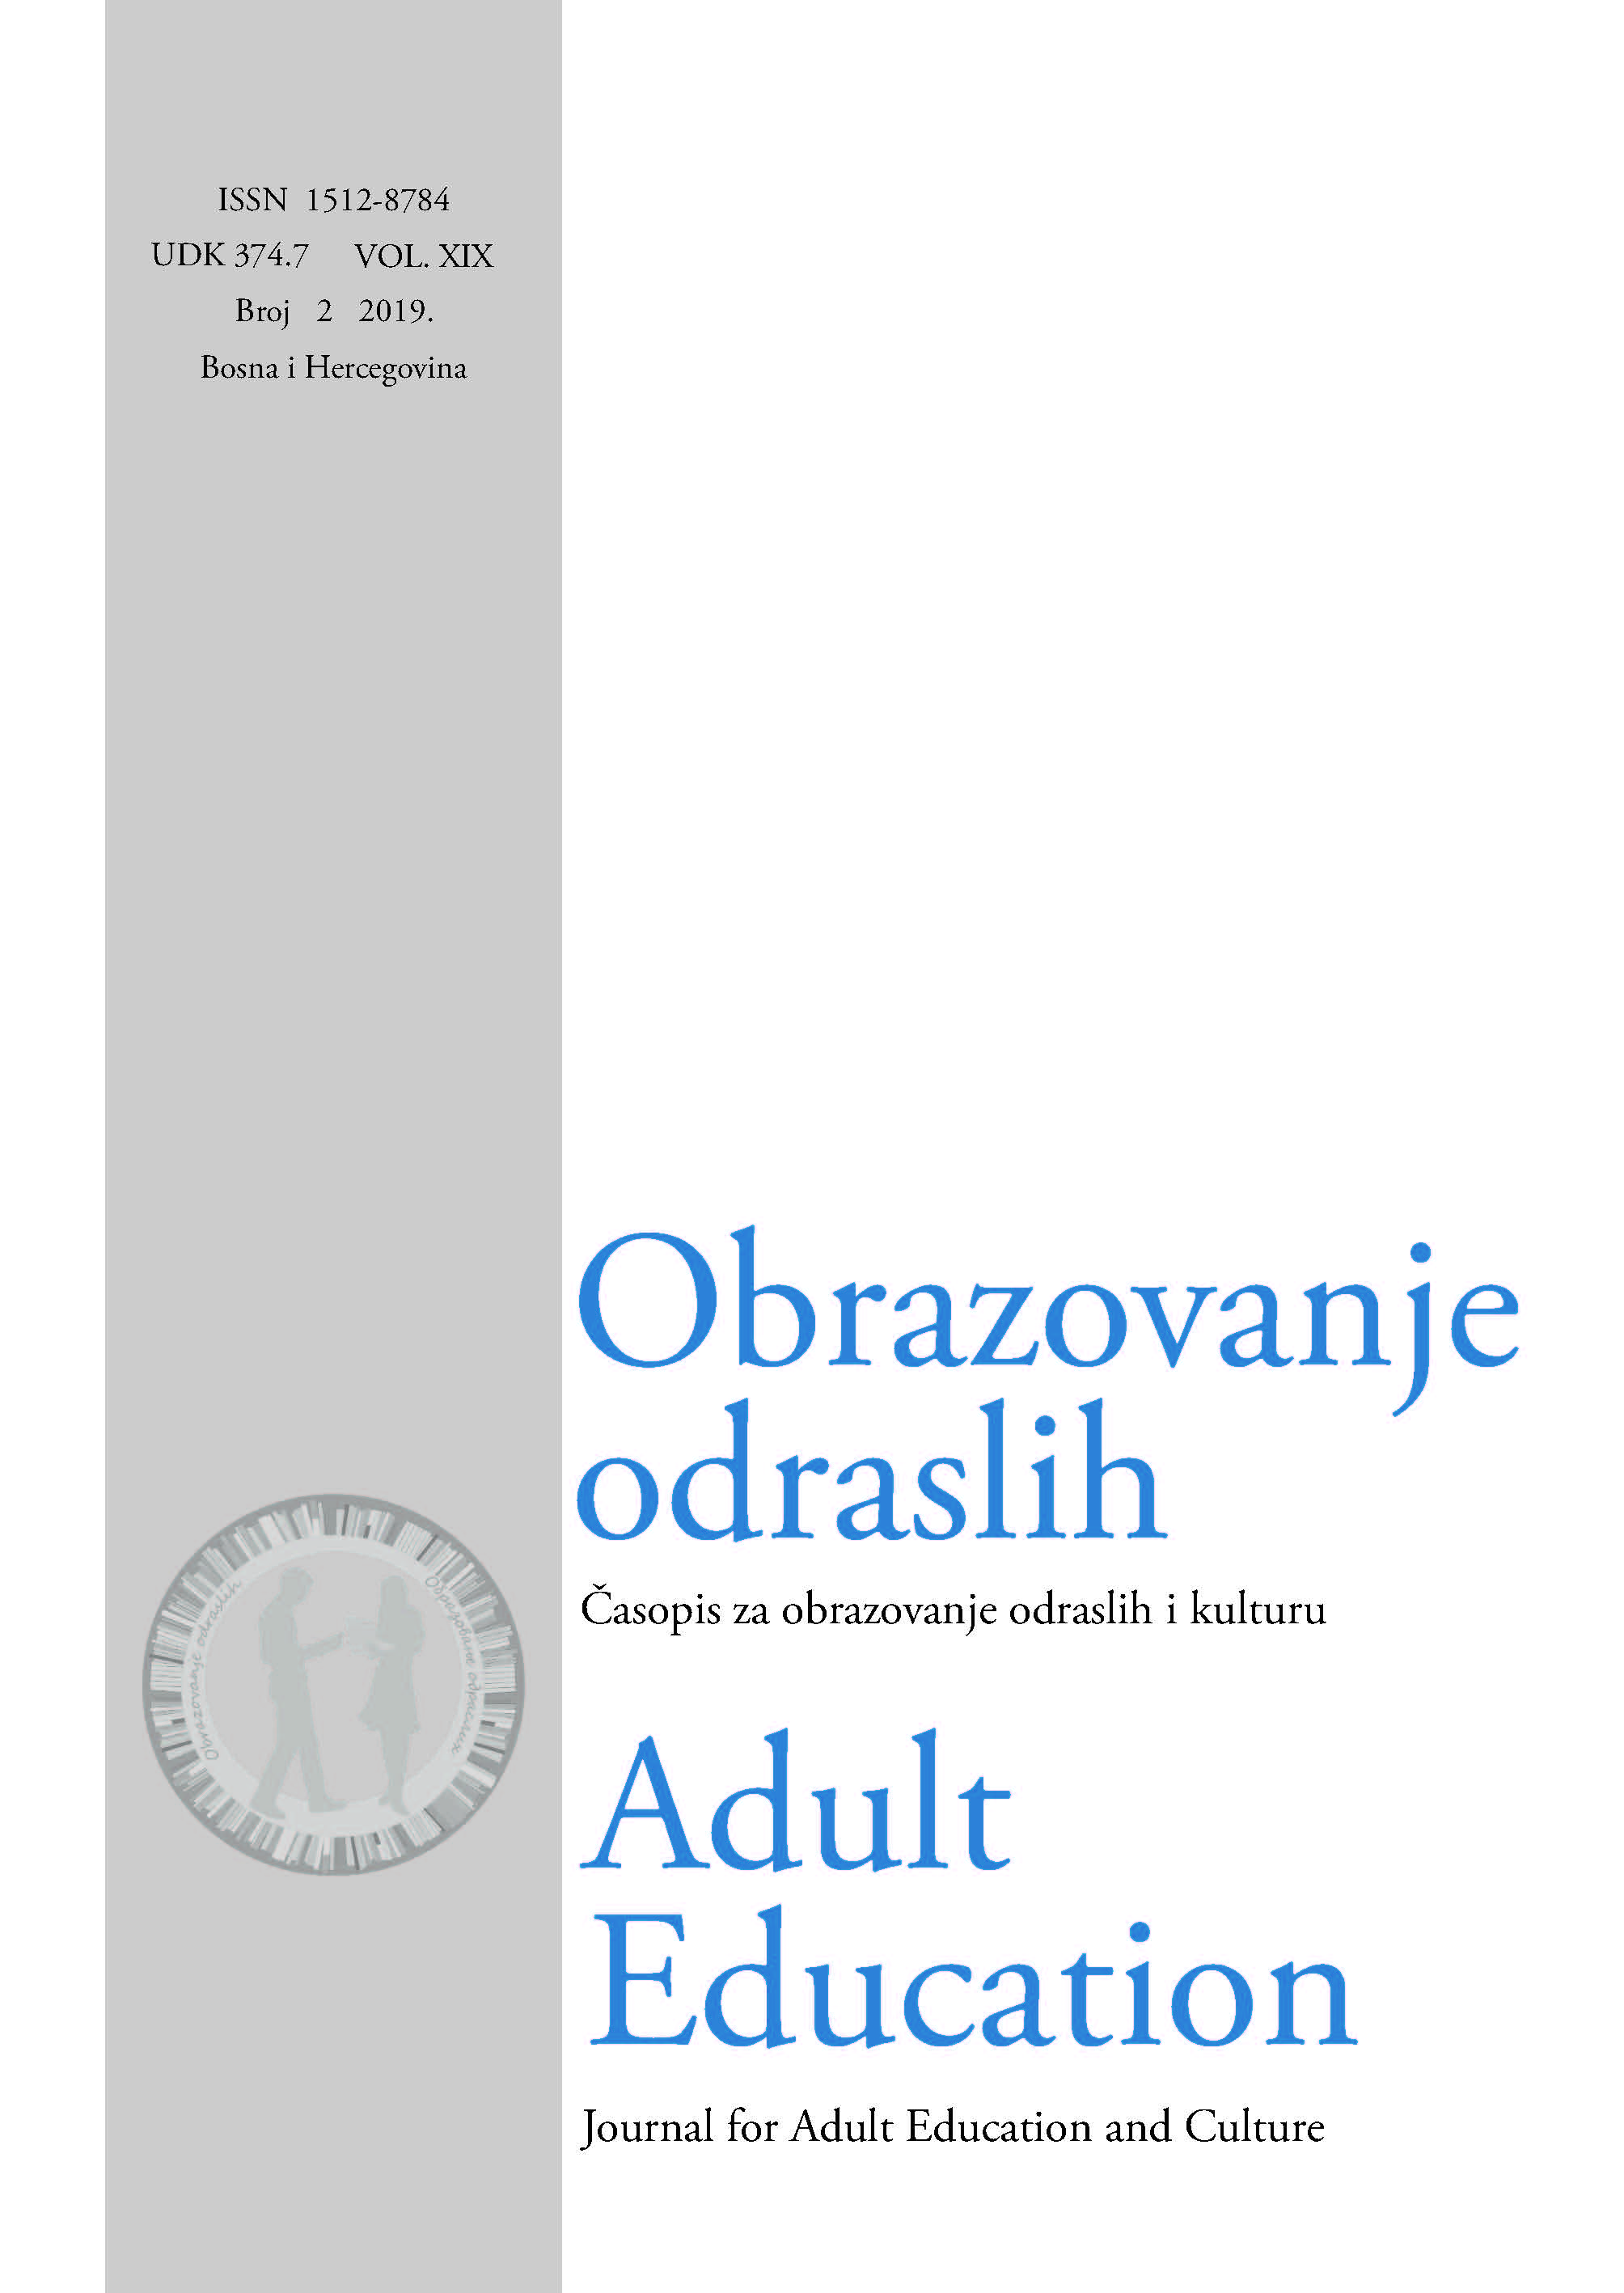 Celebrating 20 Years of Country Office Bosnia and Herzegovina - Looking at the Context and Achievements during 50 Years of DVV International and 100 Years of the German Volkshochschule Cover Image